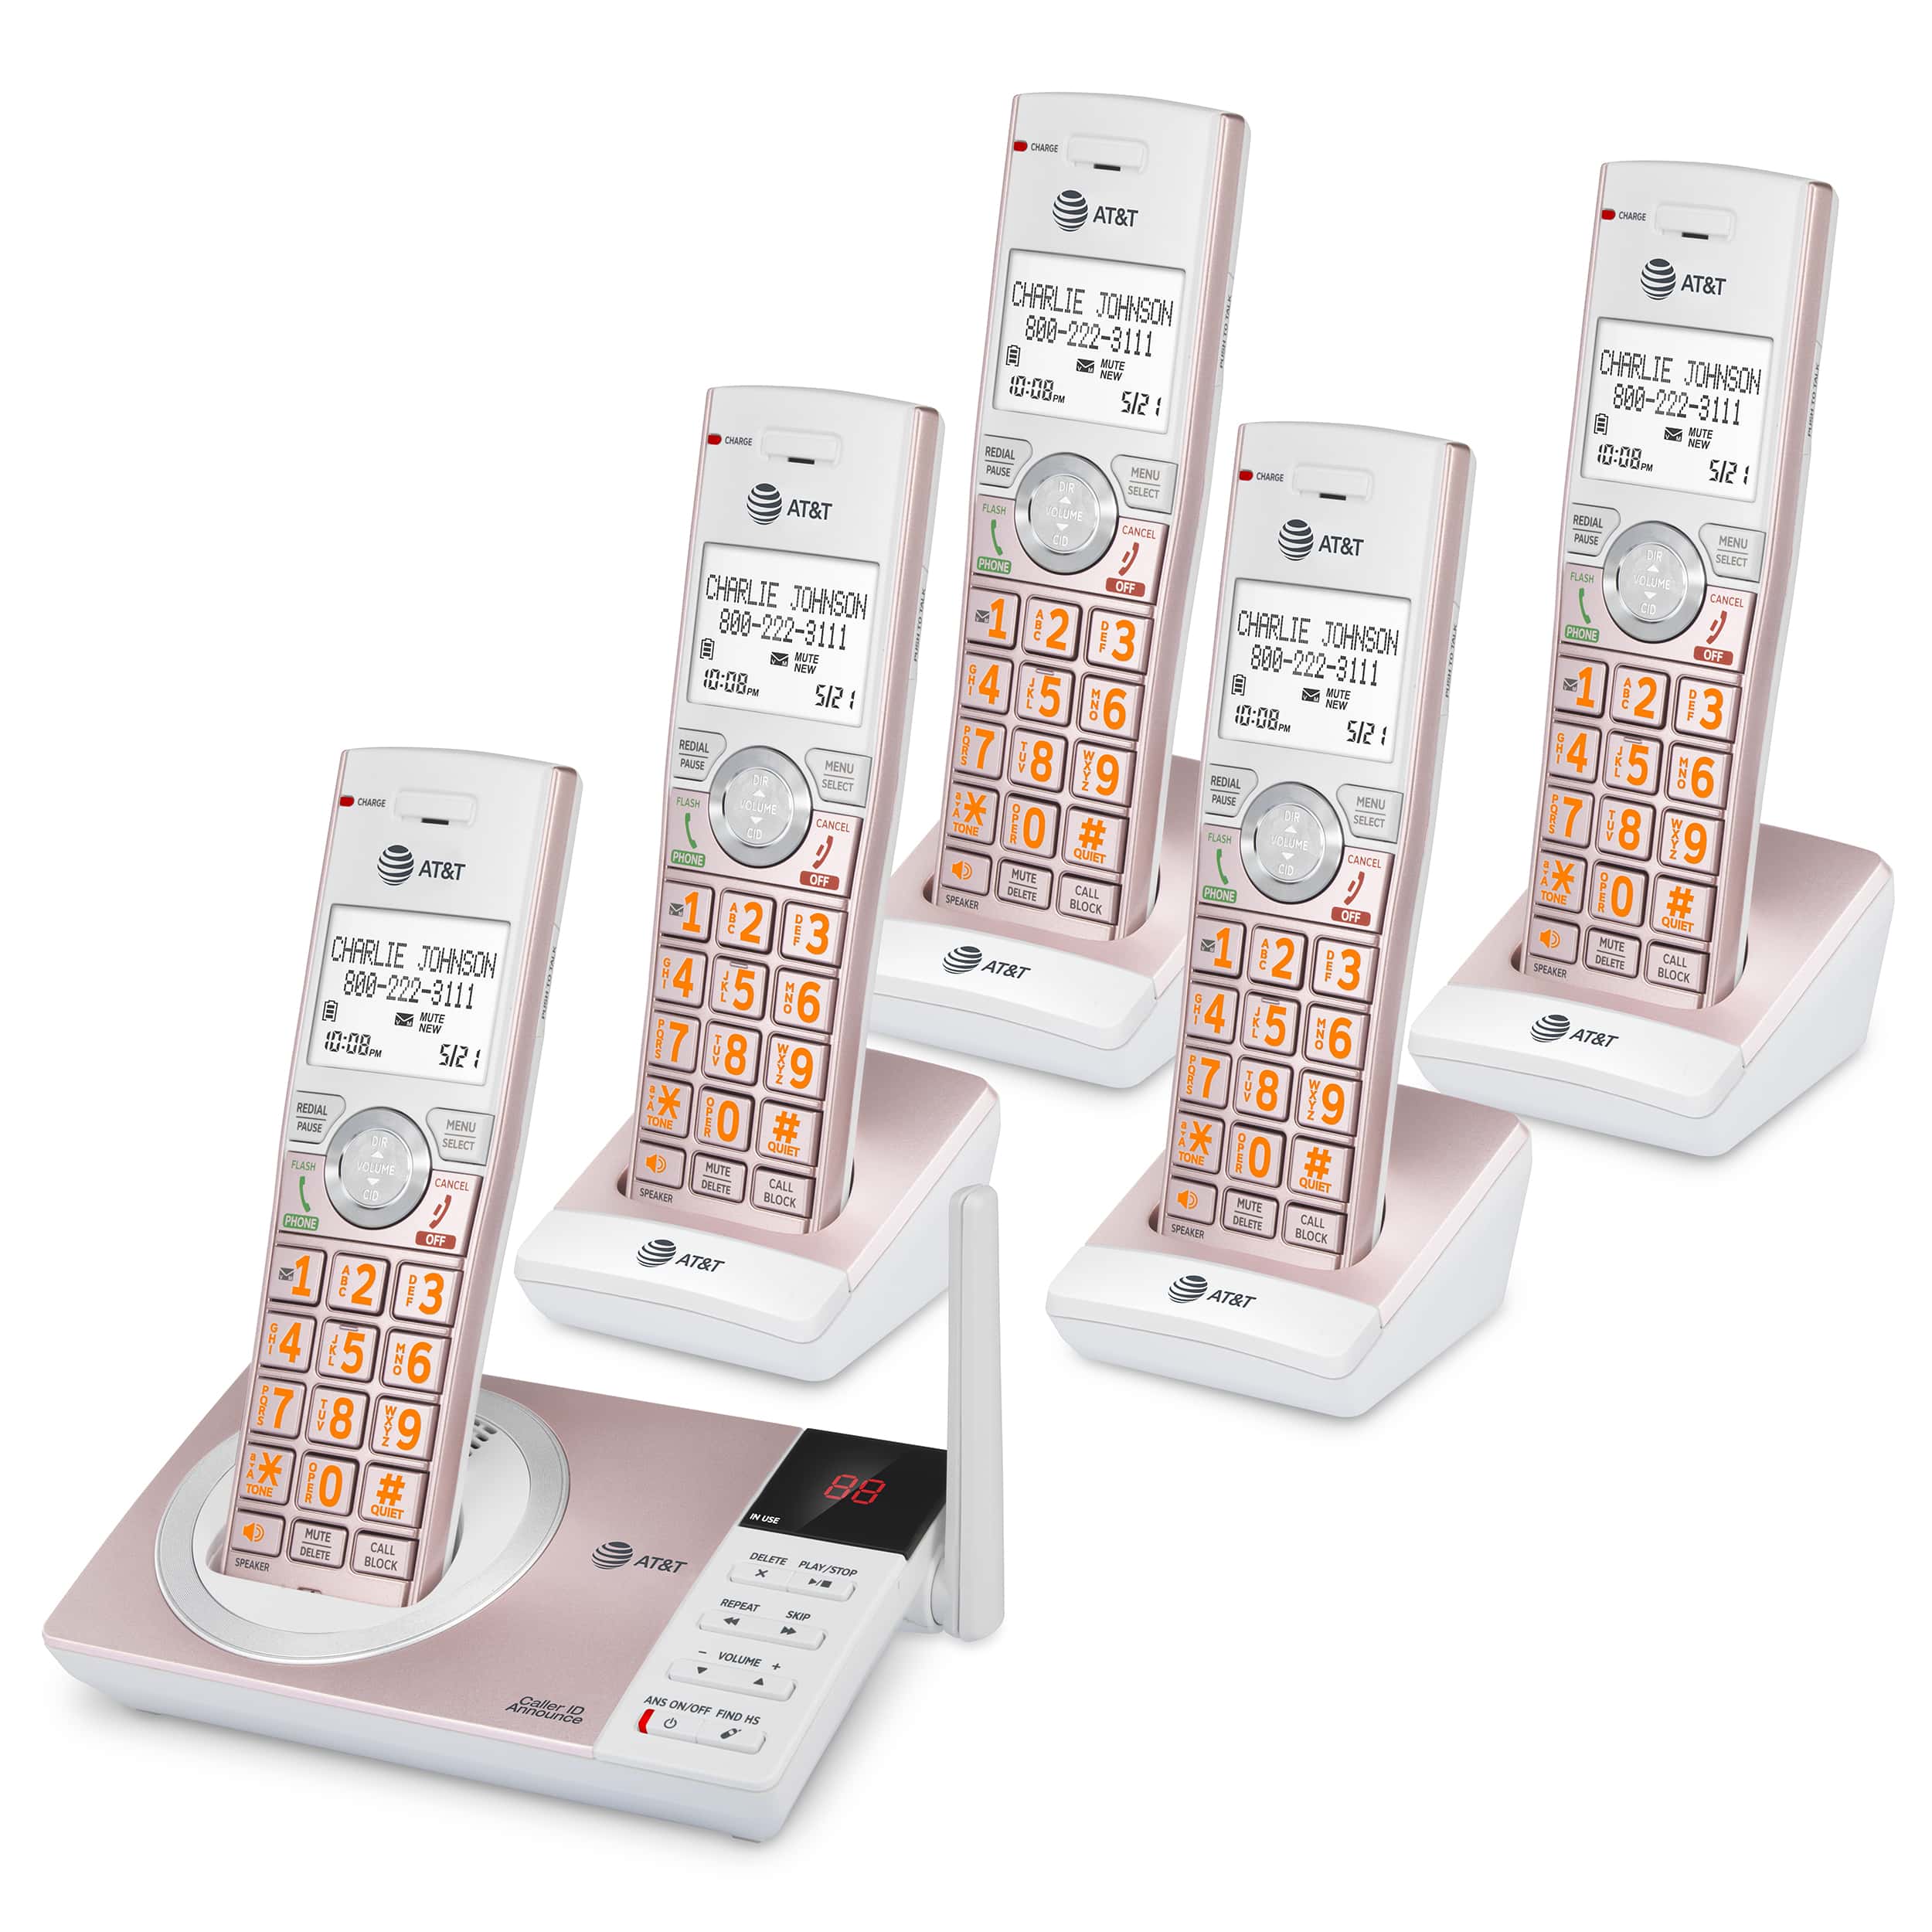 5 handset cordless answering system with smart call blocker - view 3